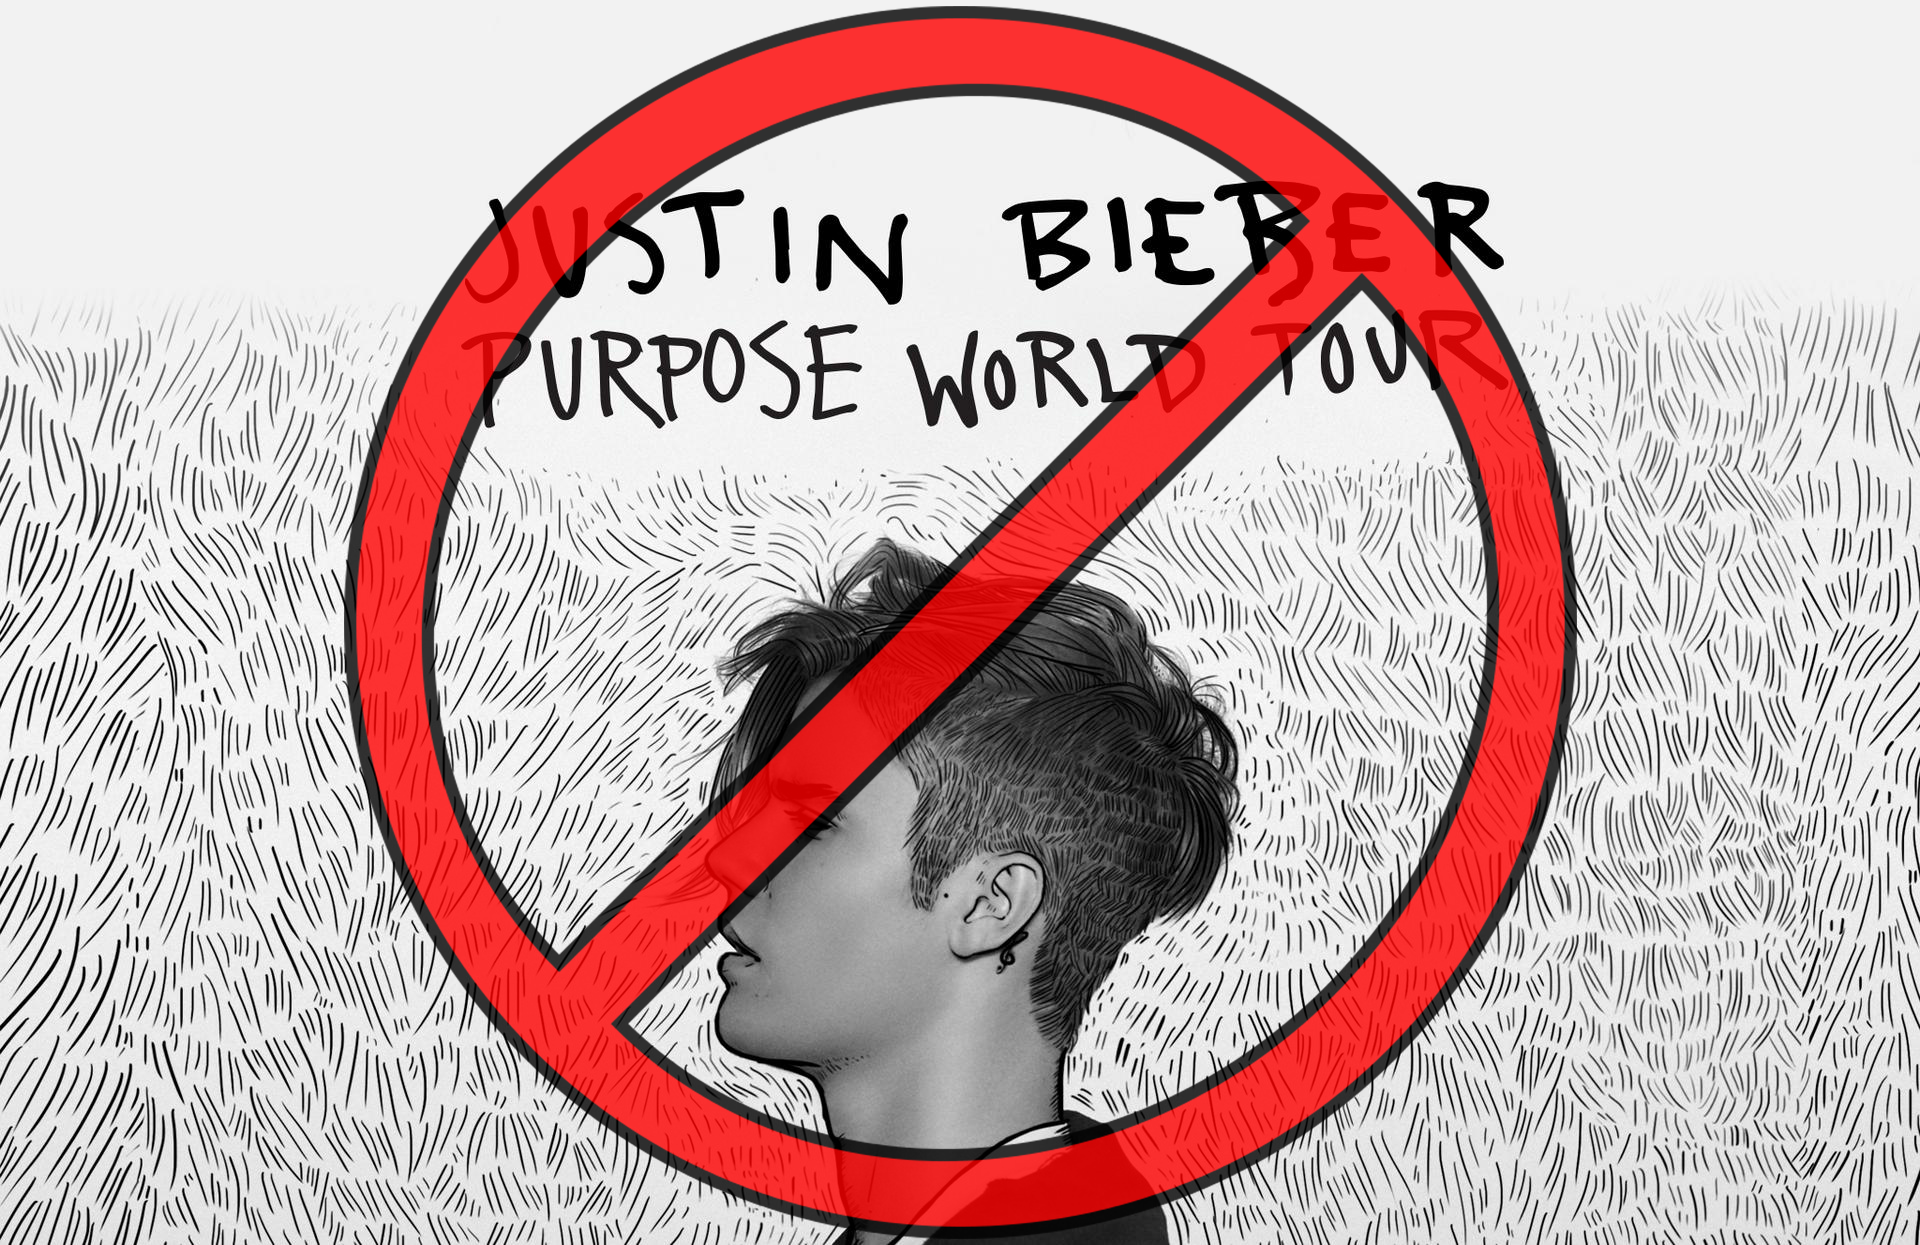 The Justin Bieber world tour is plotting stops all over Asia. Mainland China, however, will not be one of them.